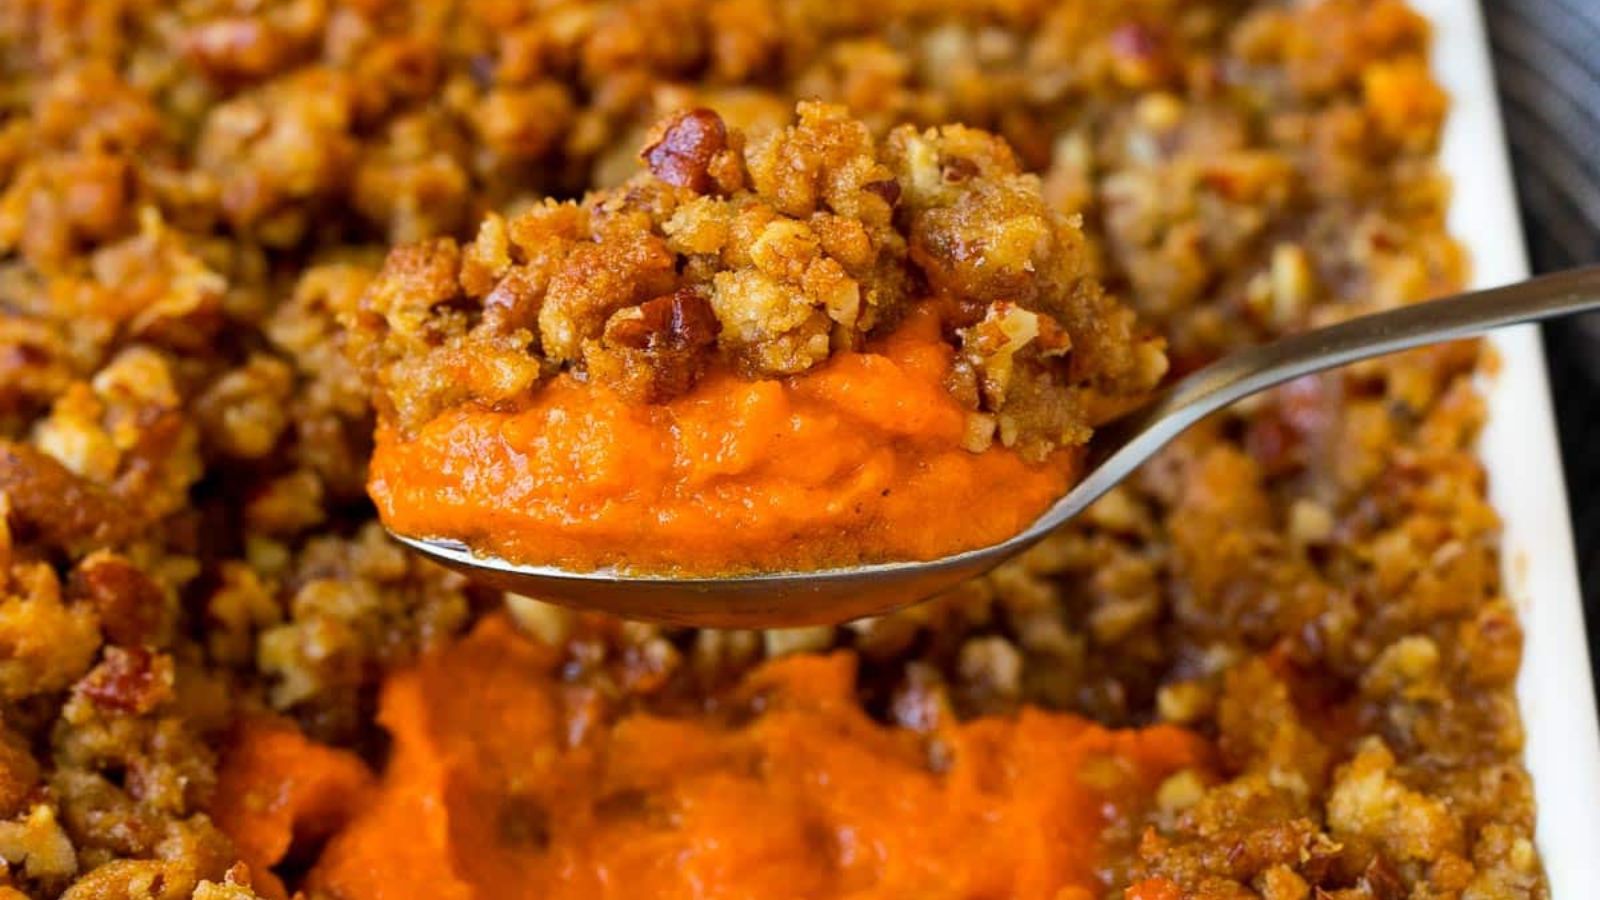 <p>This sweet potato souffle is a creamy blend of sweet potatoes and spices topped with a brown sugar and pecan streusel. An easy and elegant side dish that’s perfect for the holidays.</p>